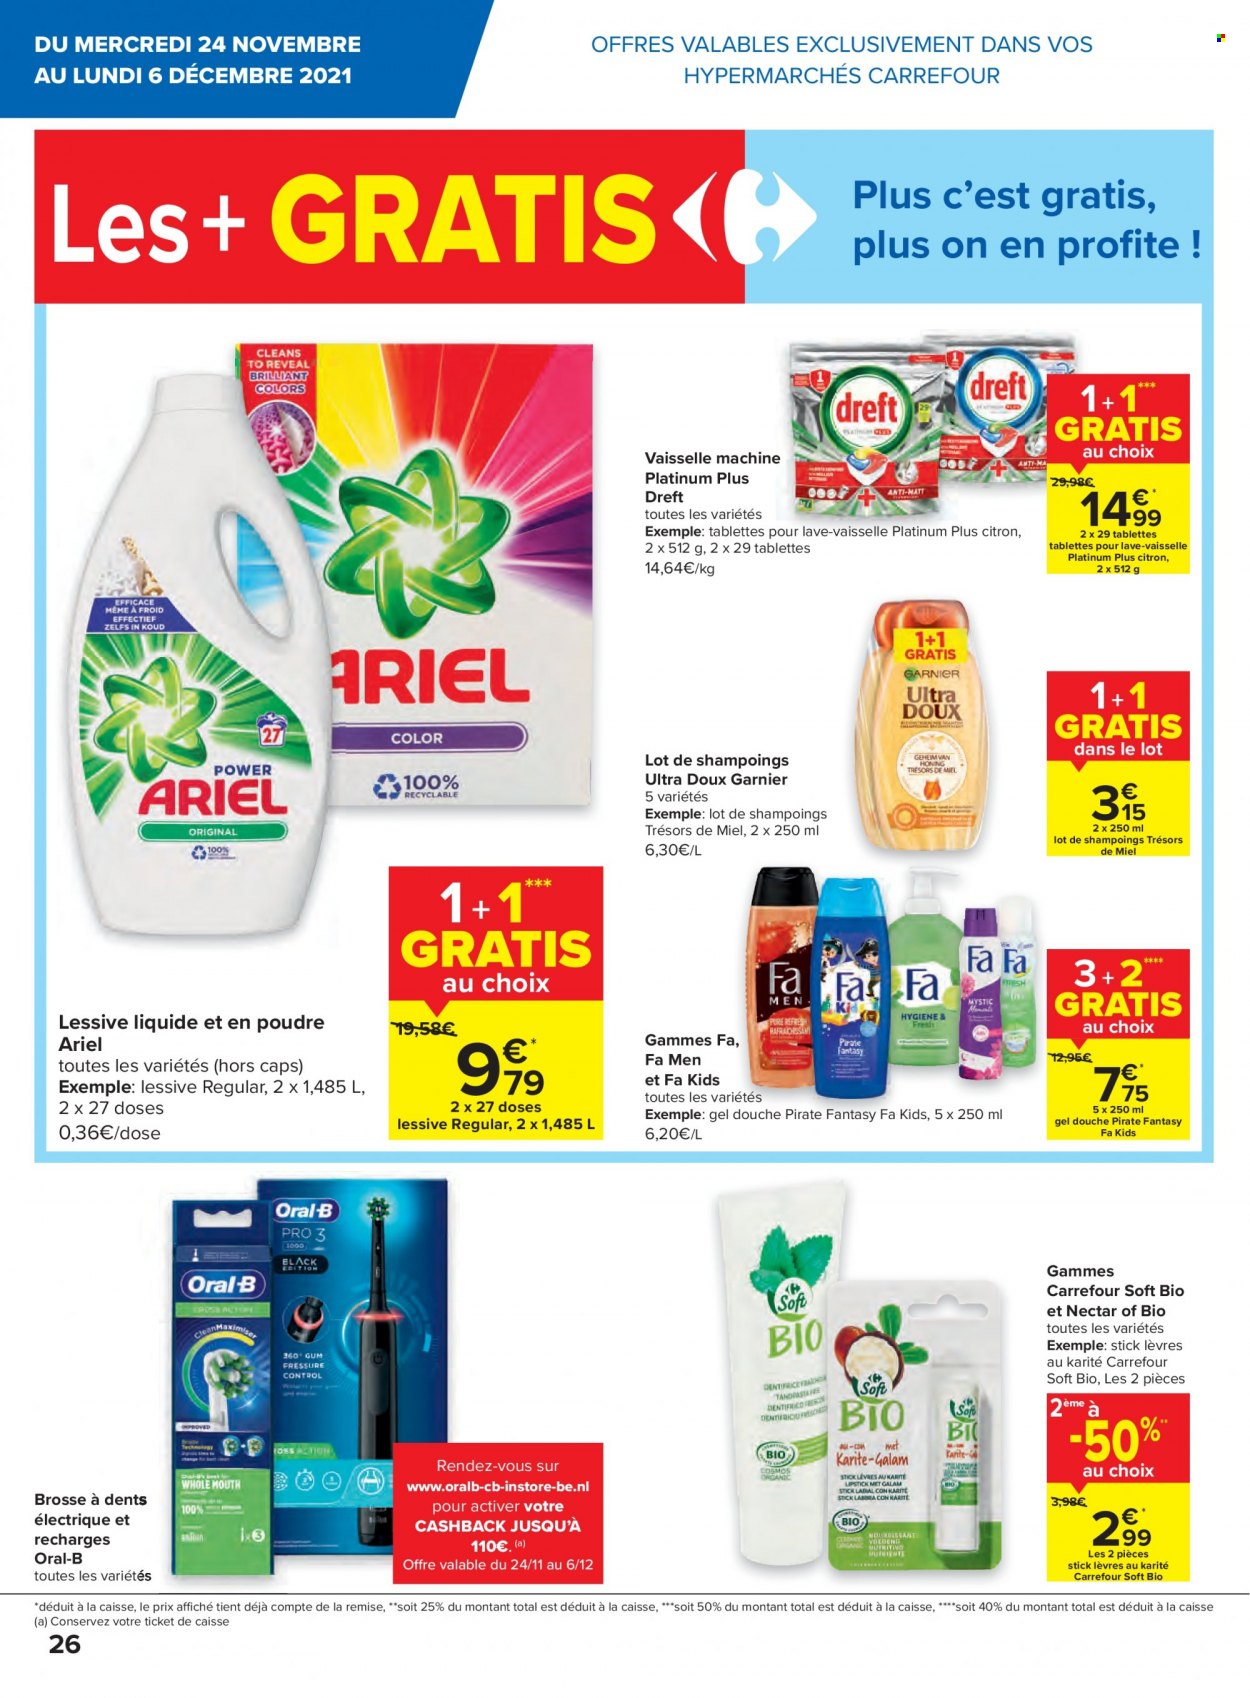 Catalogue Carrefour hypermarkt - 24.11.2021 - 6.12.2021. Page 26.